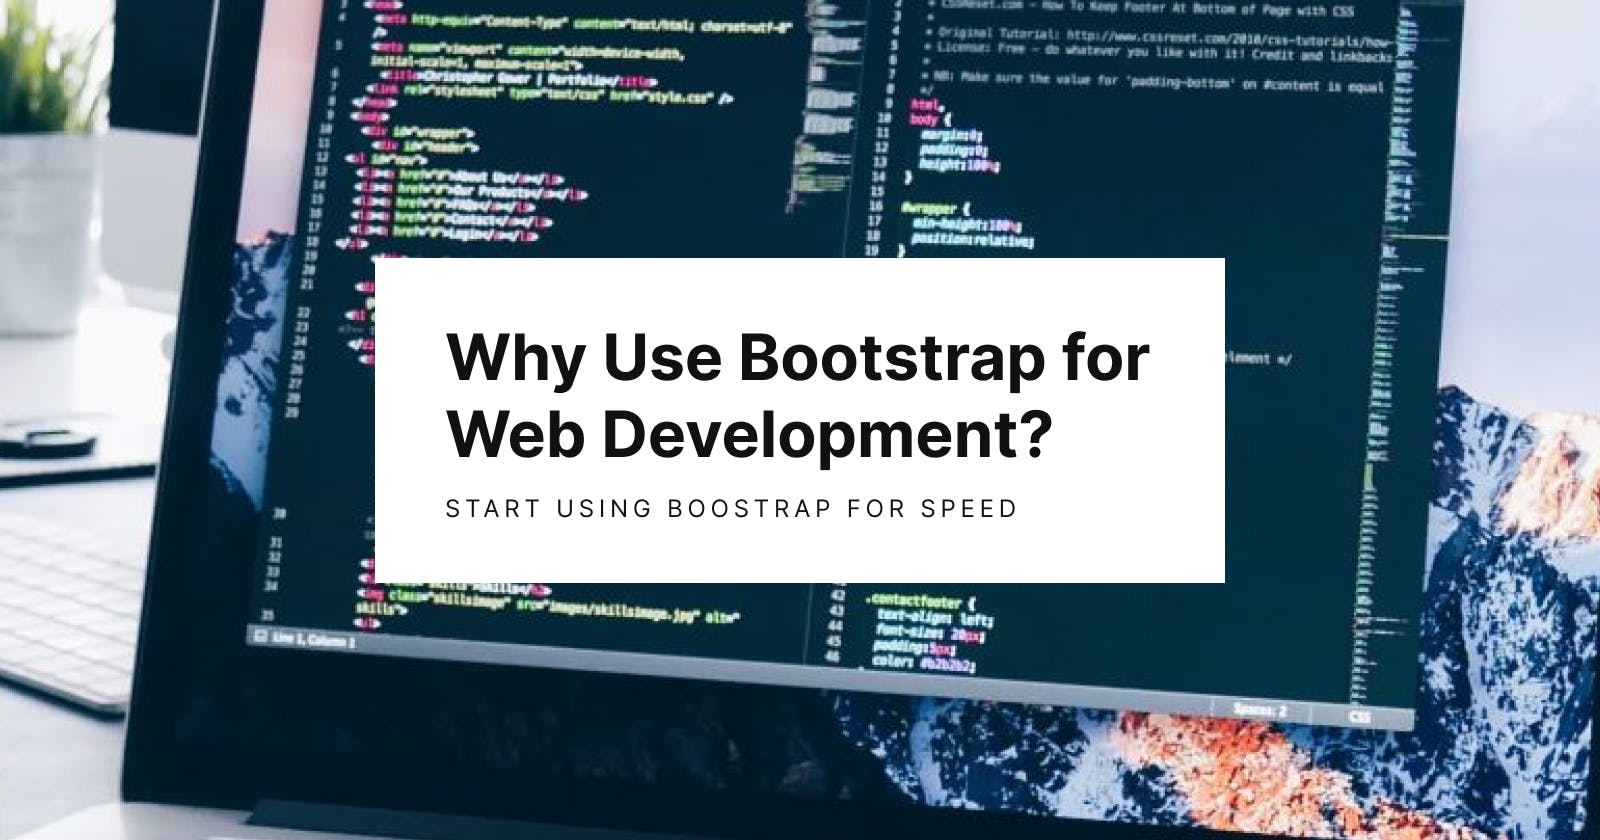 Why Use Bootstrap for Web Development?